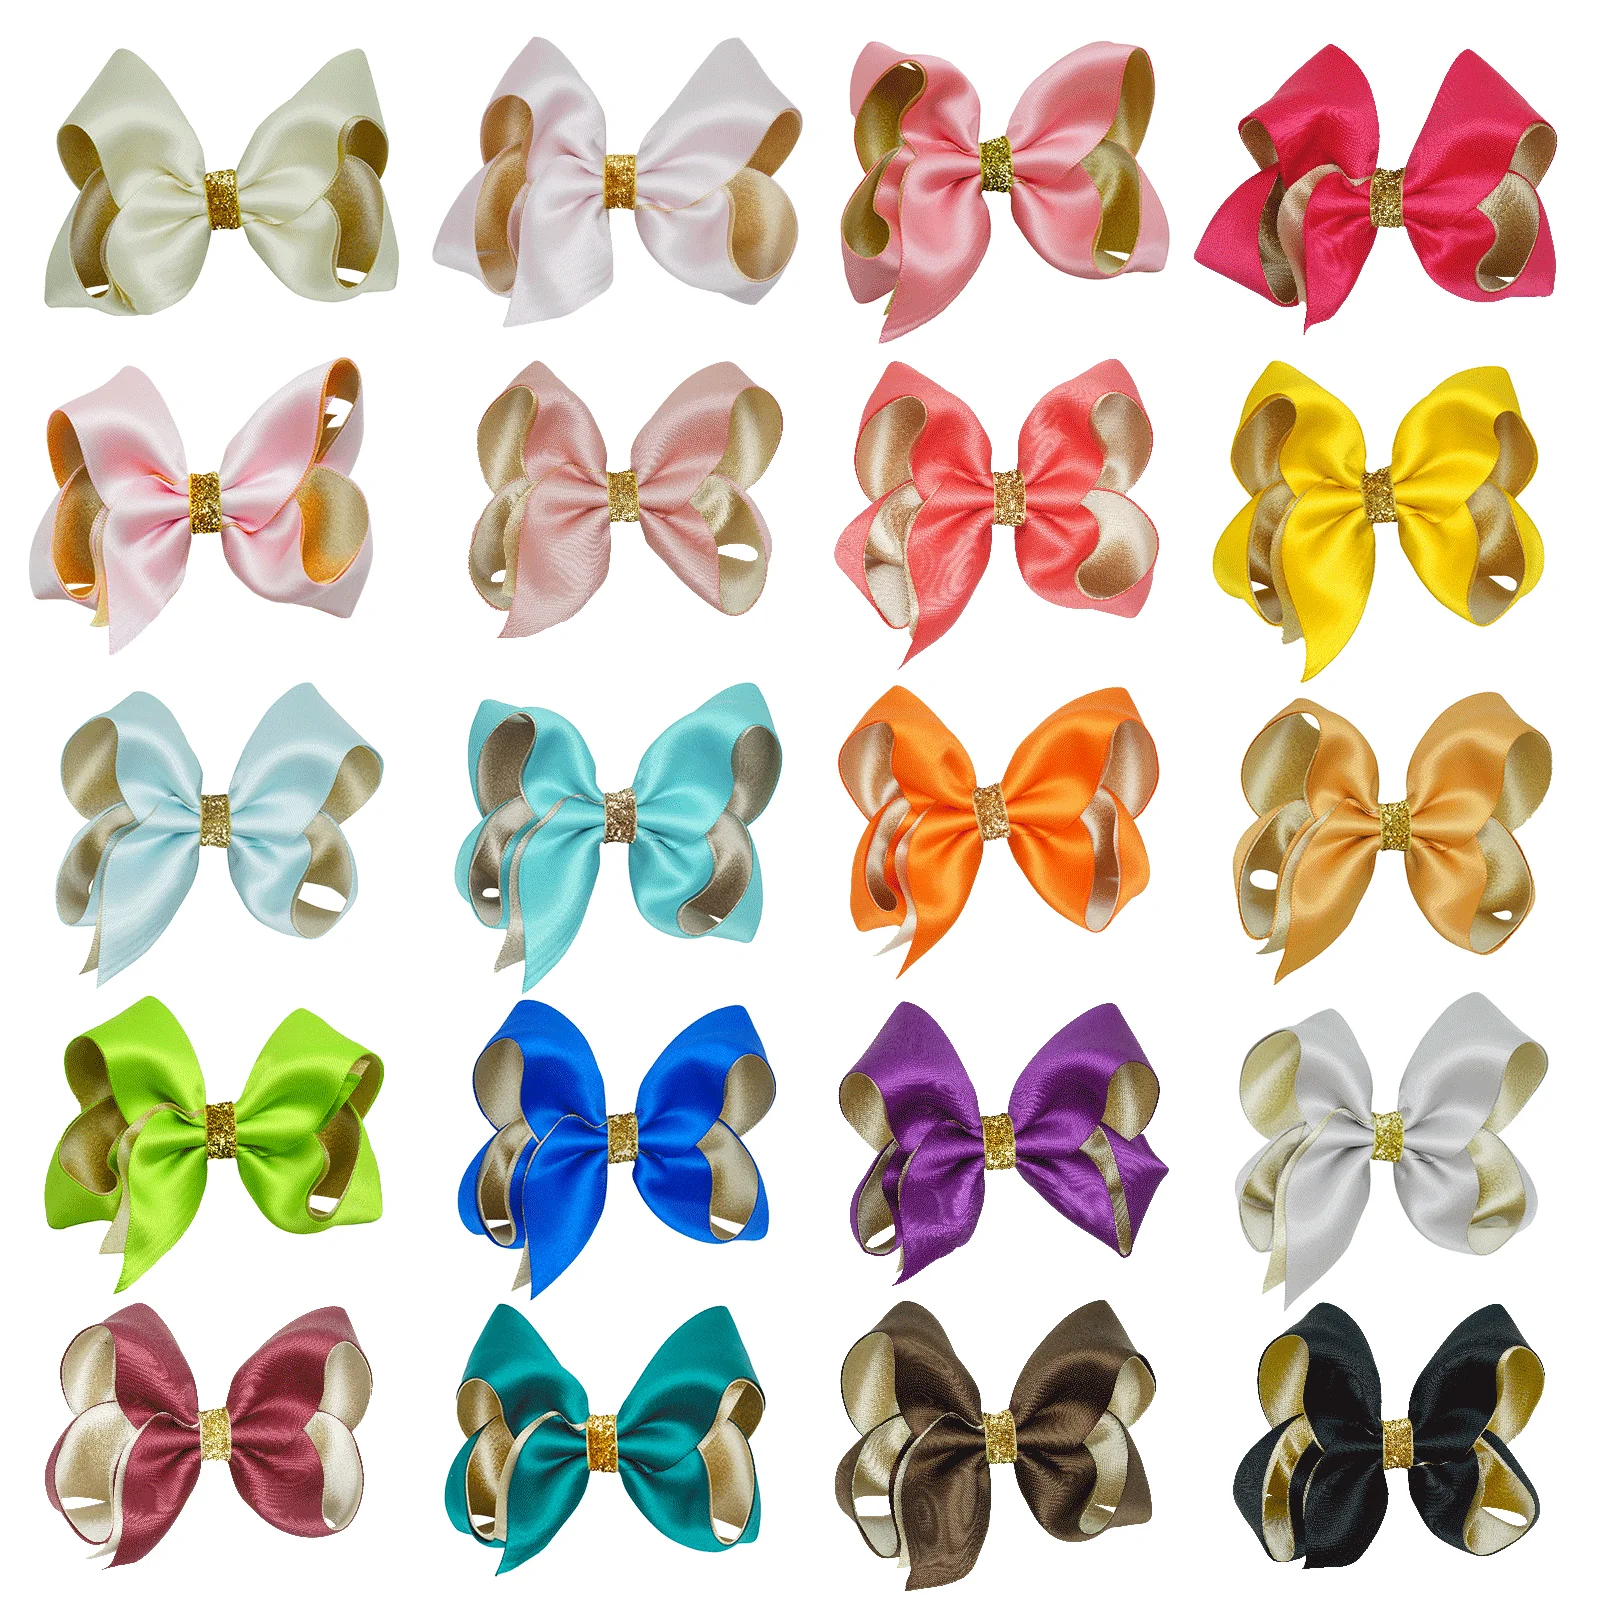 20 Pcs 4 Inch Hair Bows Clips Boutique Double Layer Grosgrain Ribbon Hair Bows for Newborn Infant Toddler Kid (20 Color)